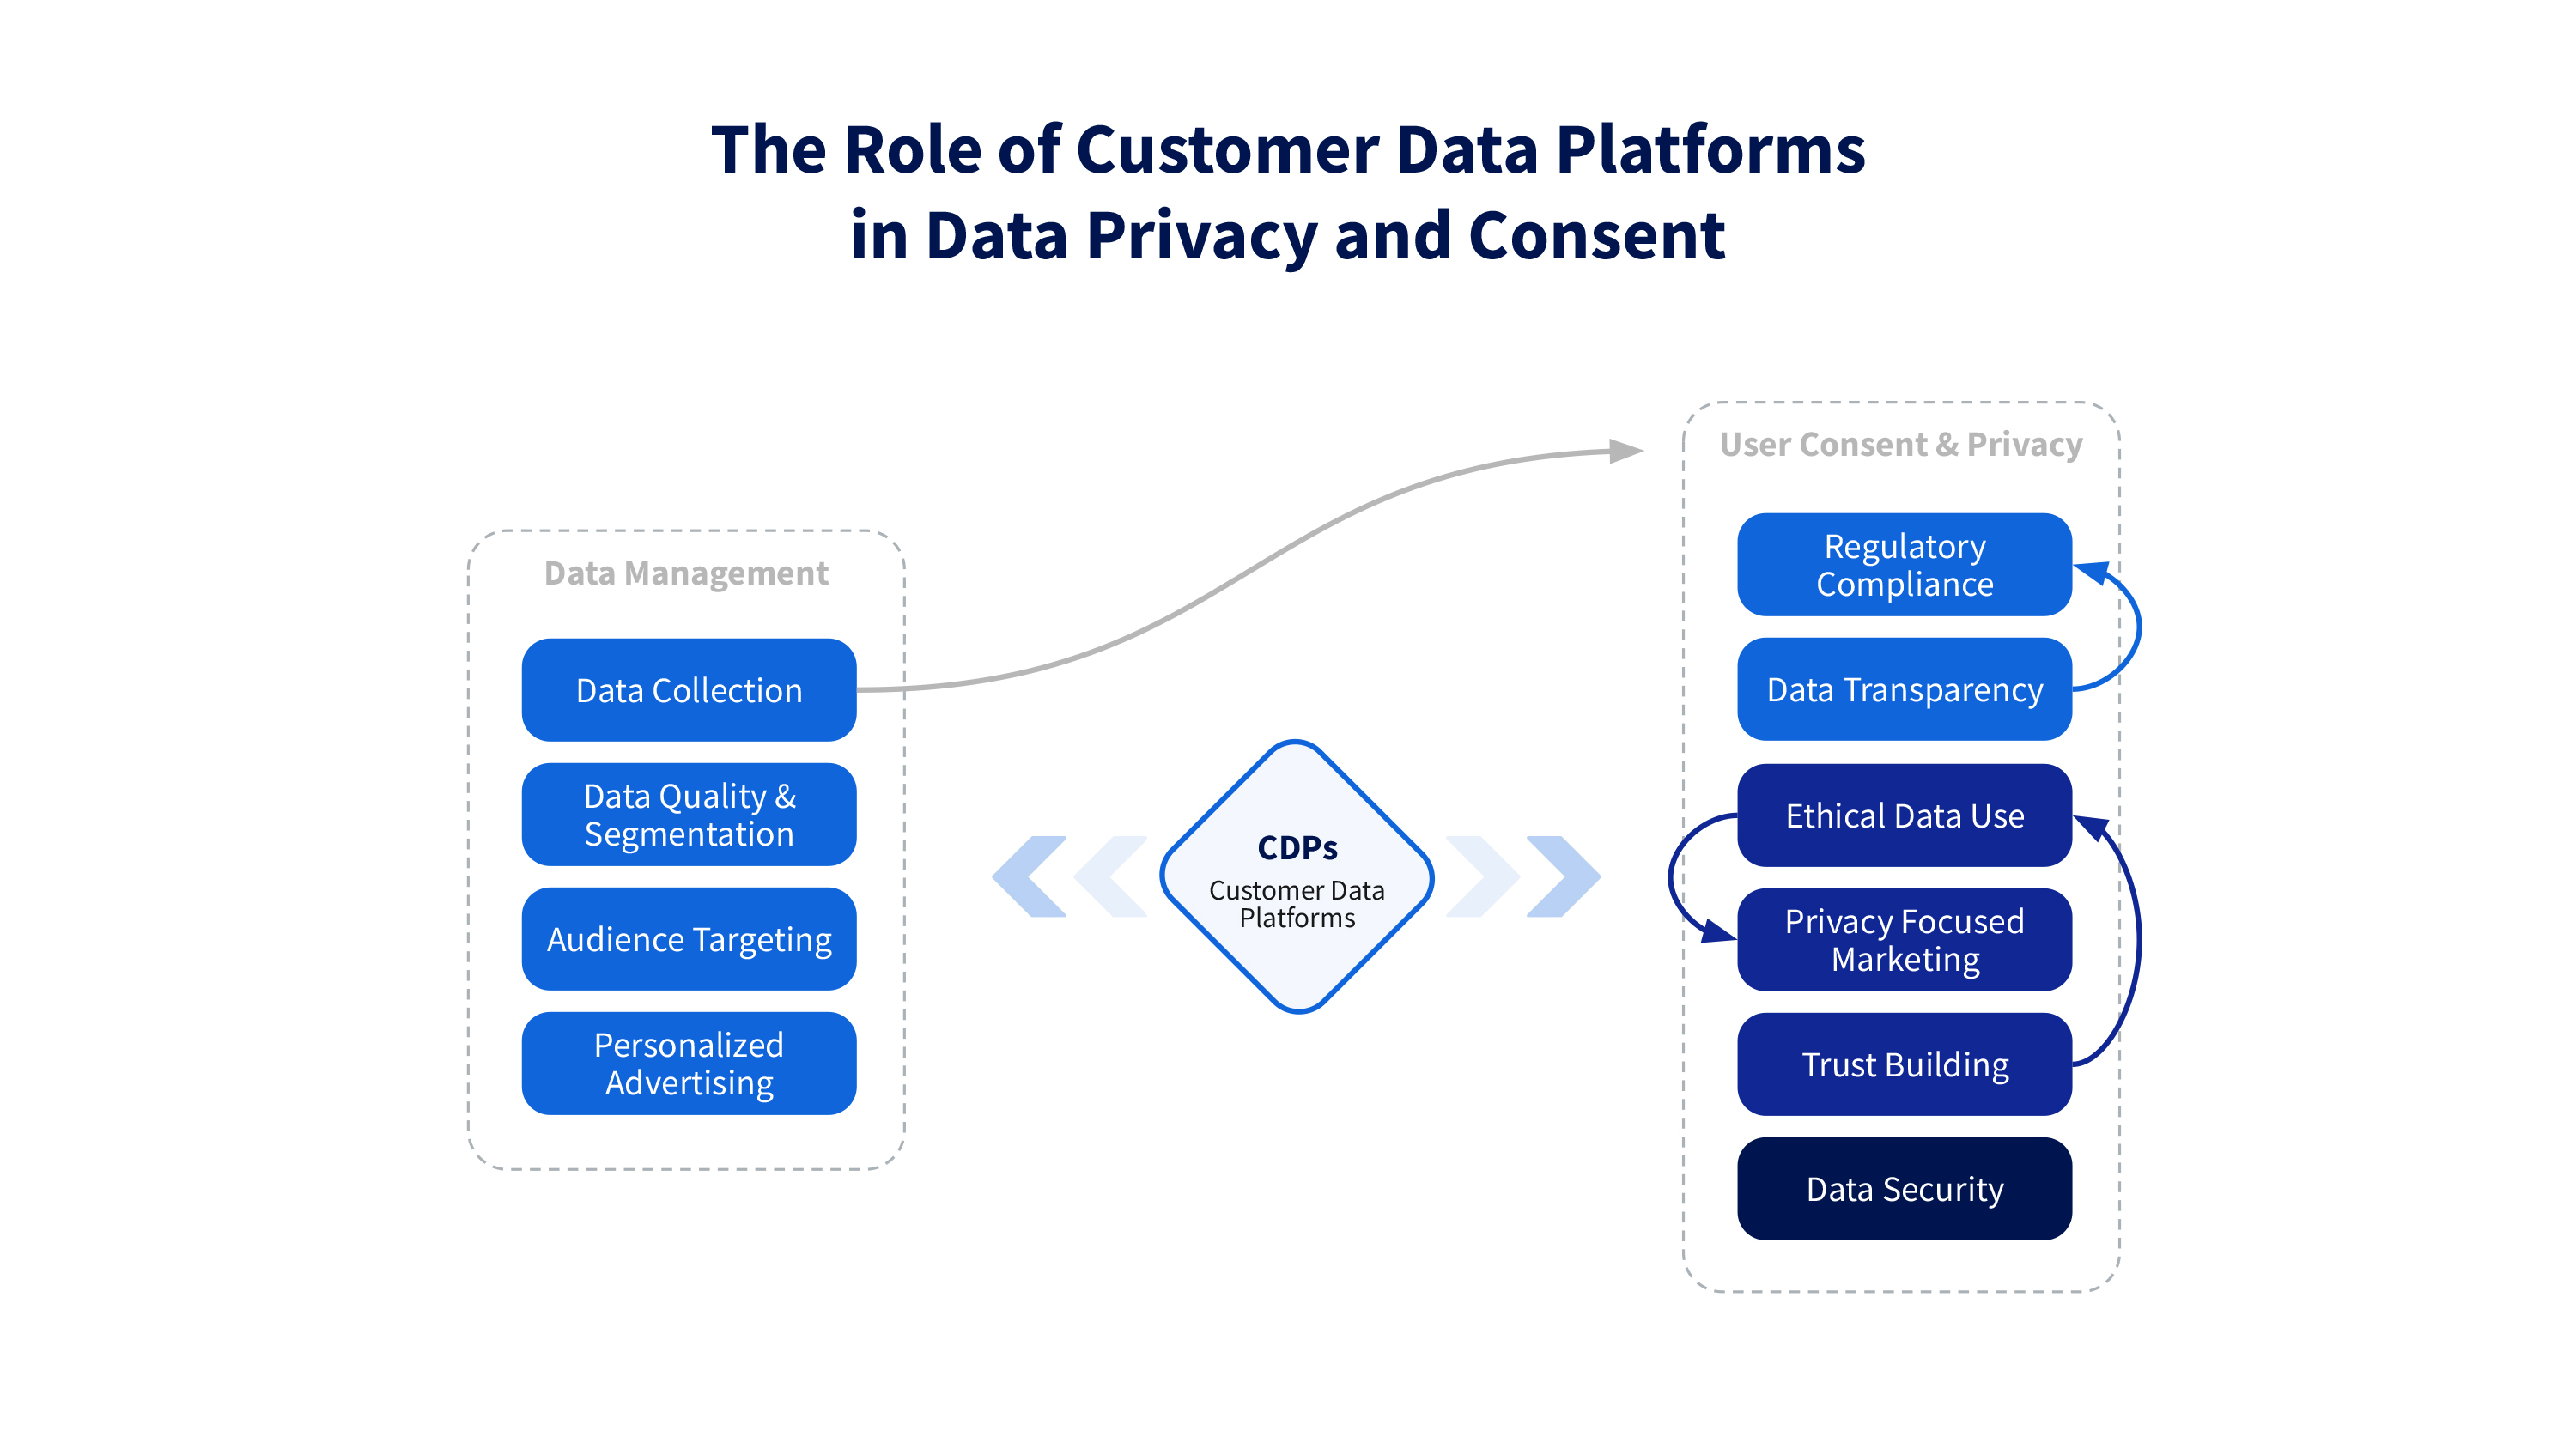 the role of cDP in privacy and consent